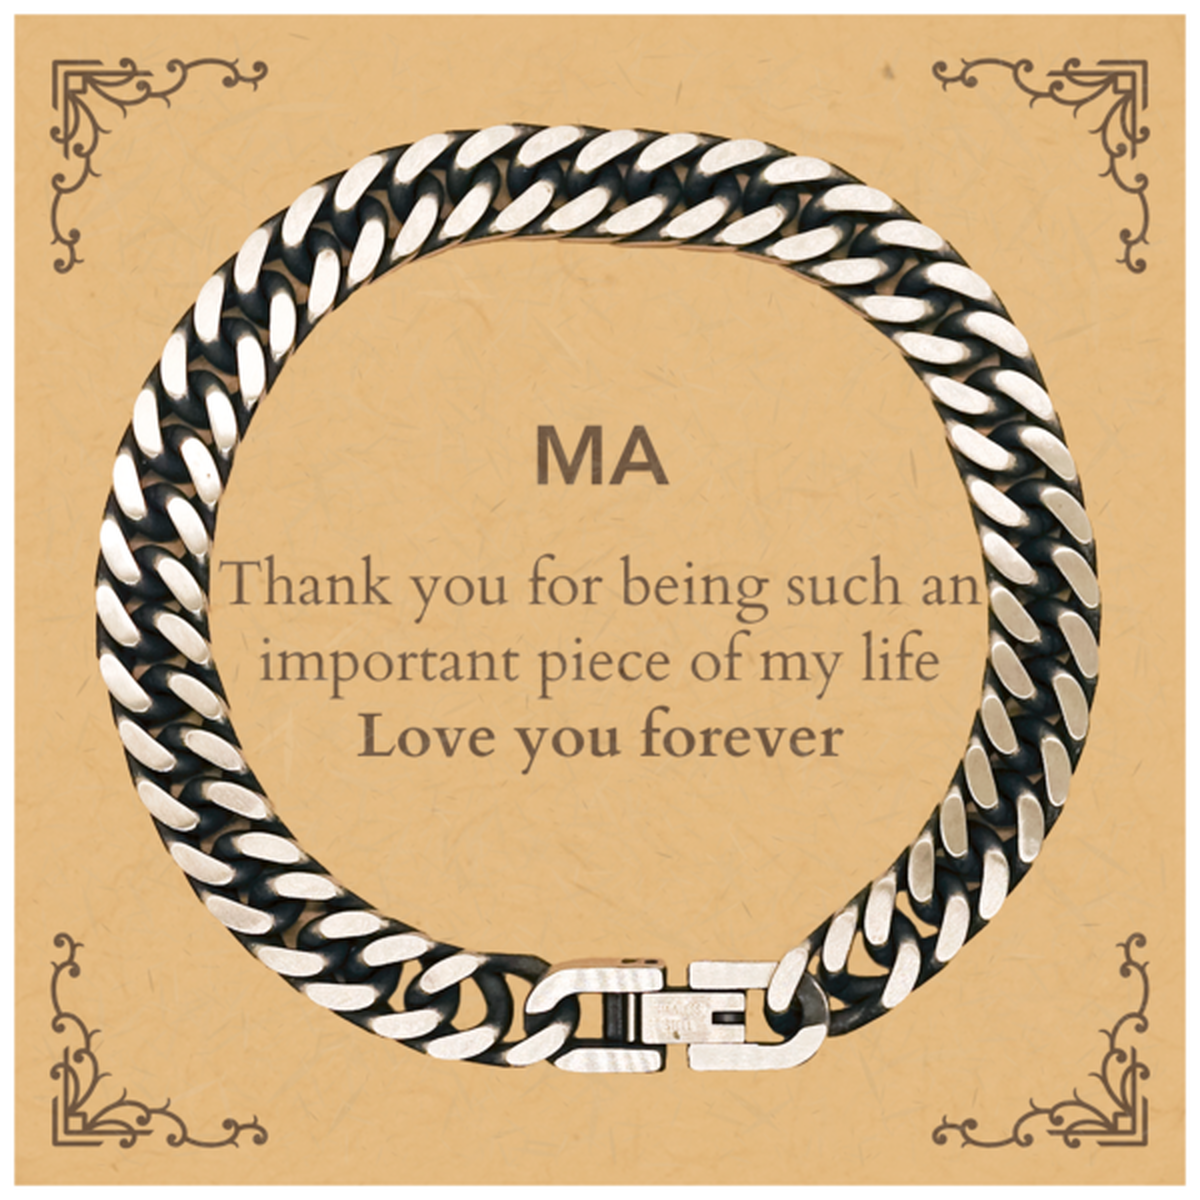 Appropriate Ma Cuban Link Chain Bracelet Epic Birthday Gifts for Ma Thank you for being such an important piece of my life Ma Christmas Mothers Fathers Day